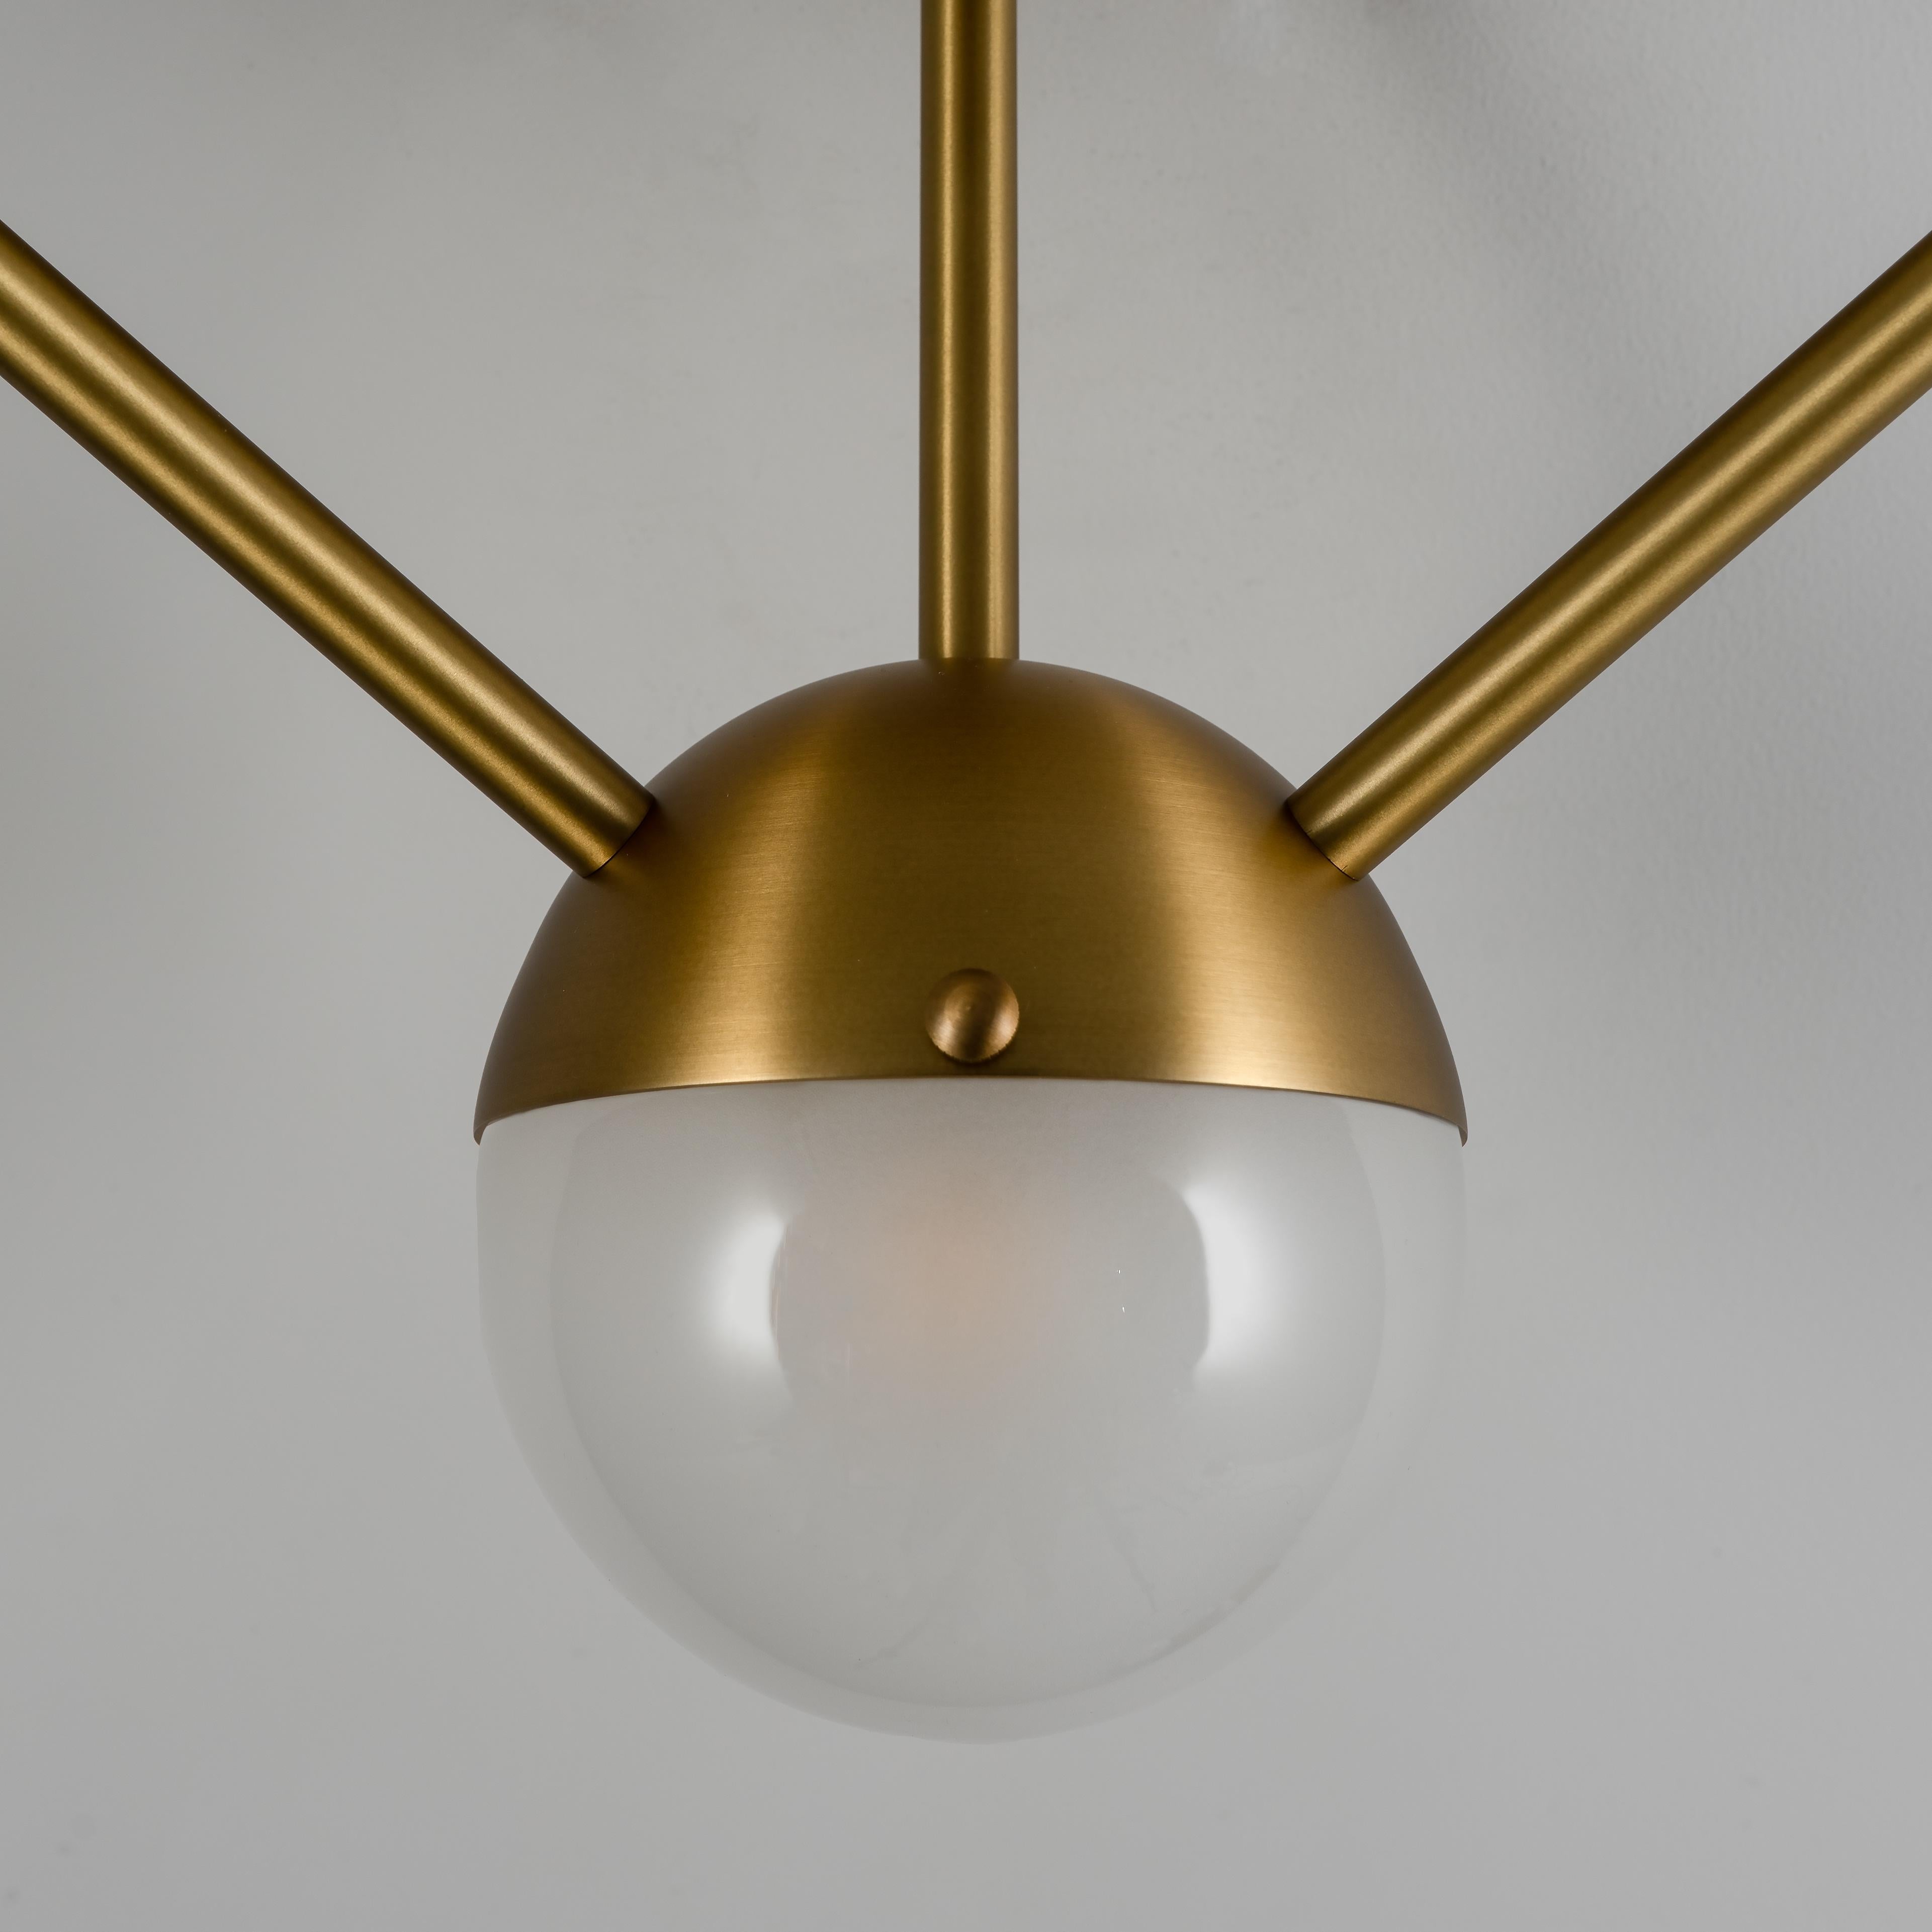 Polish Molecule 5 Wall Sconce by Schwung For Sale